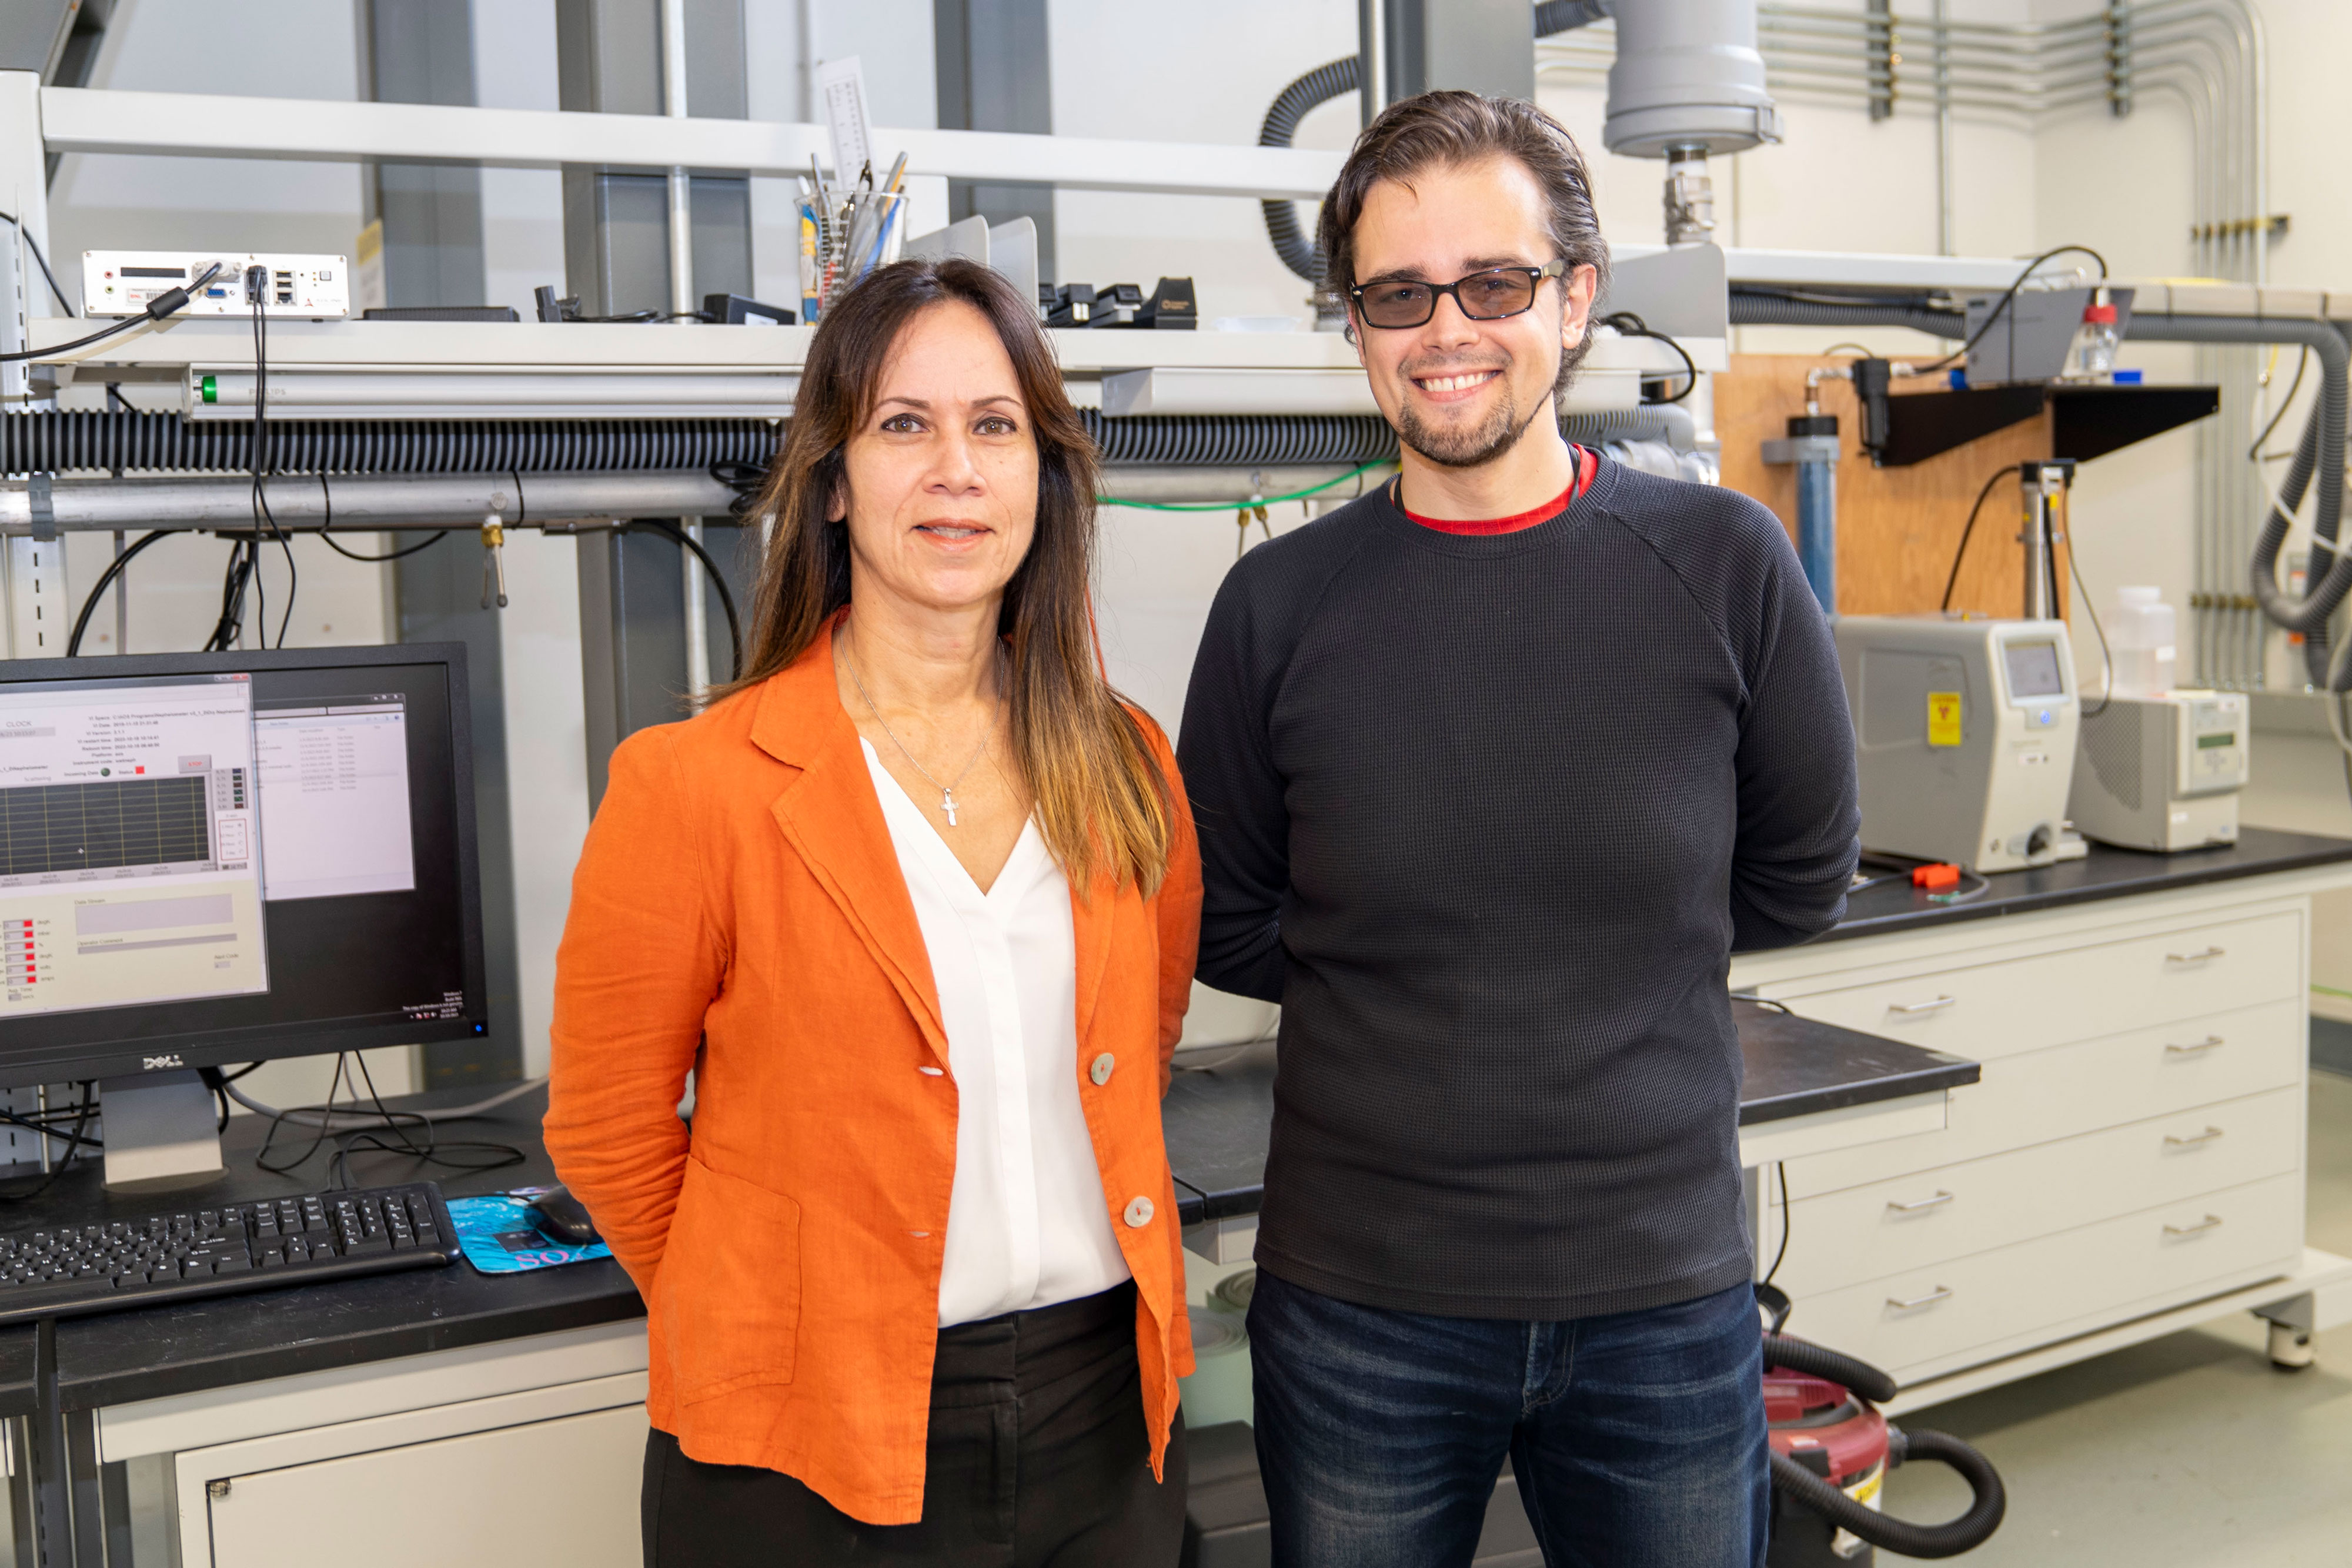 Olga Mayol-Bracero and Janek Uin stand together in a lab.